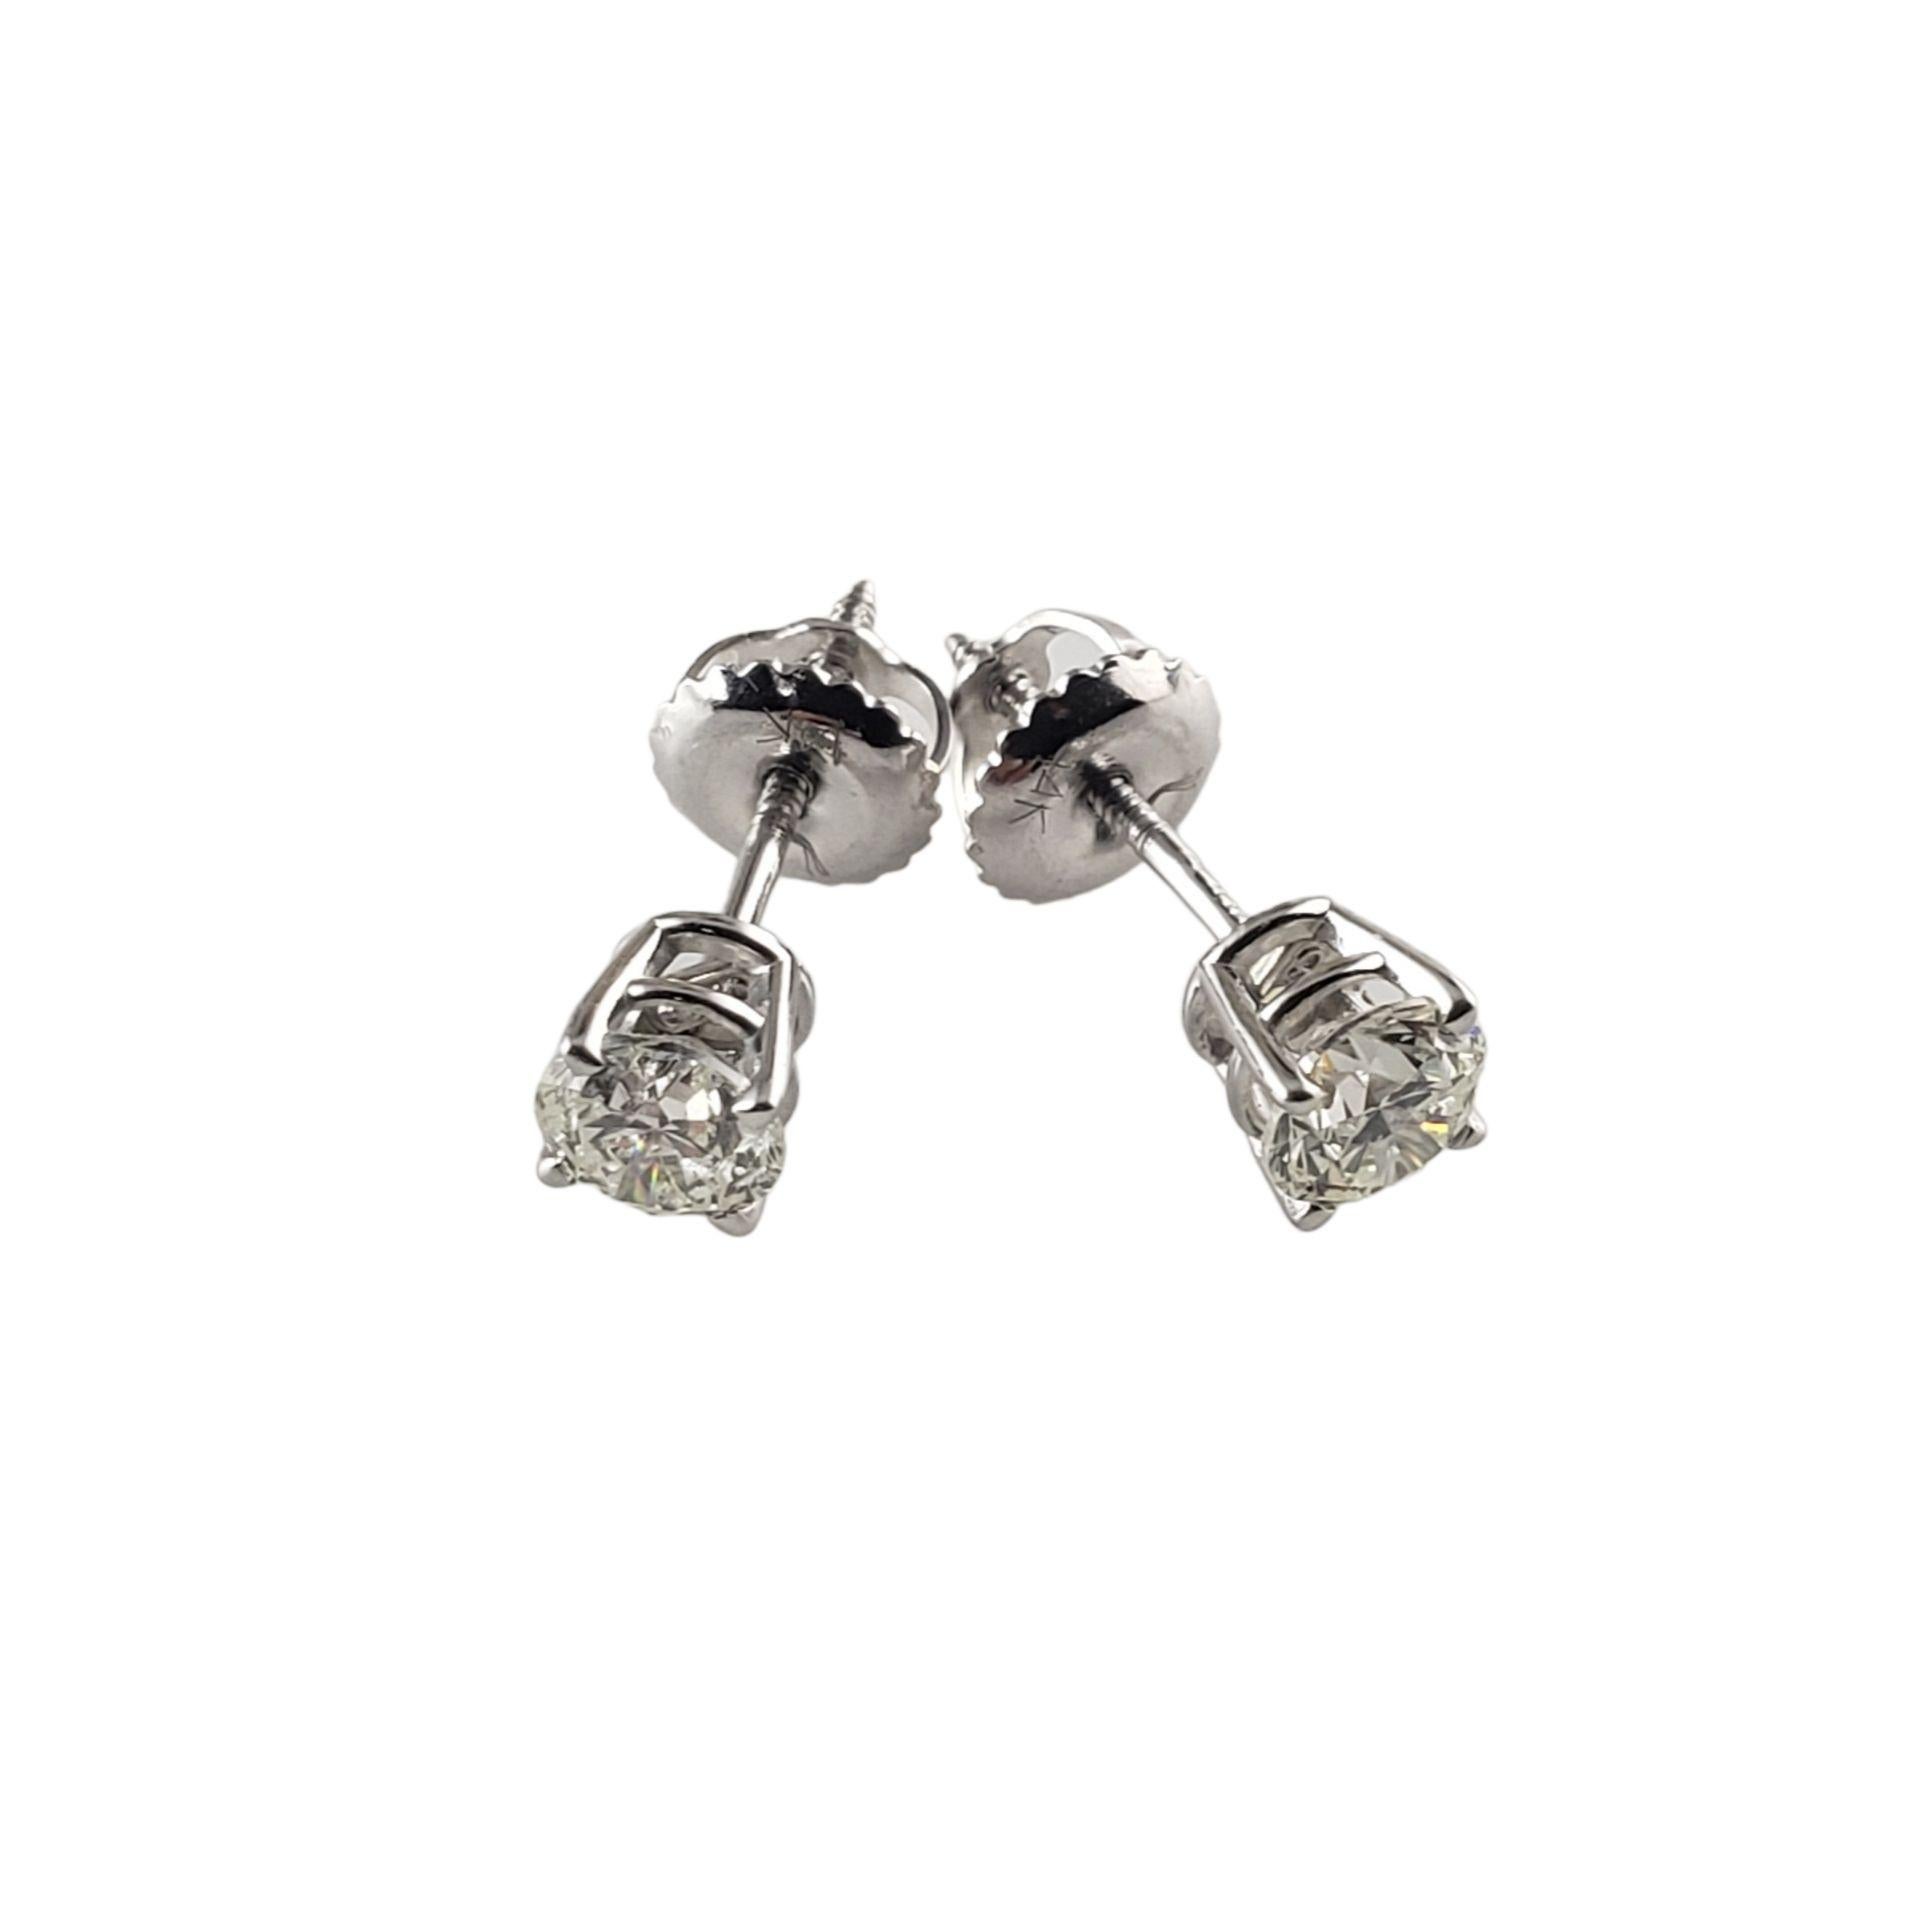 These sparkling earrings each feature one round brilliant cut diamond set in classic 14K white gold. Screw back closures.

Approximate diamond weight: .60 ct.

Diamond color: I

Diamond clarity: I1

Size: 5 mm

Weight:  0.7 gr./ 0.4 dwt.

Stamped: 